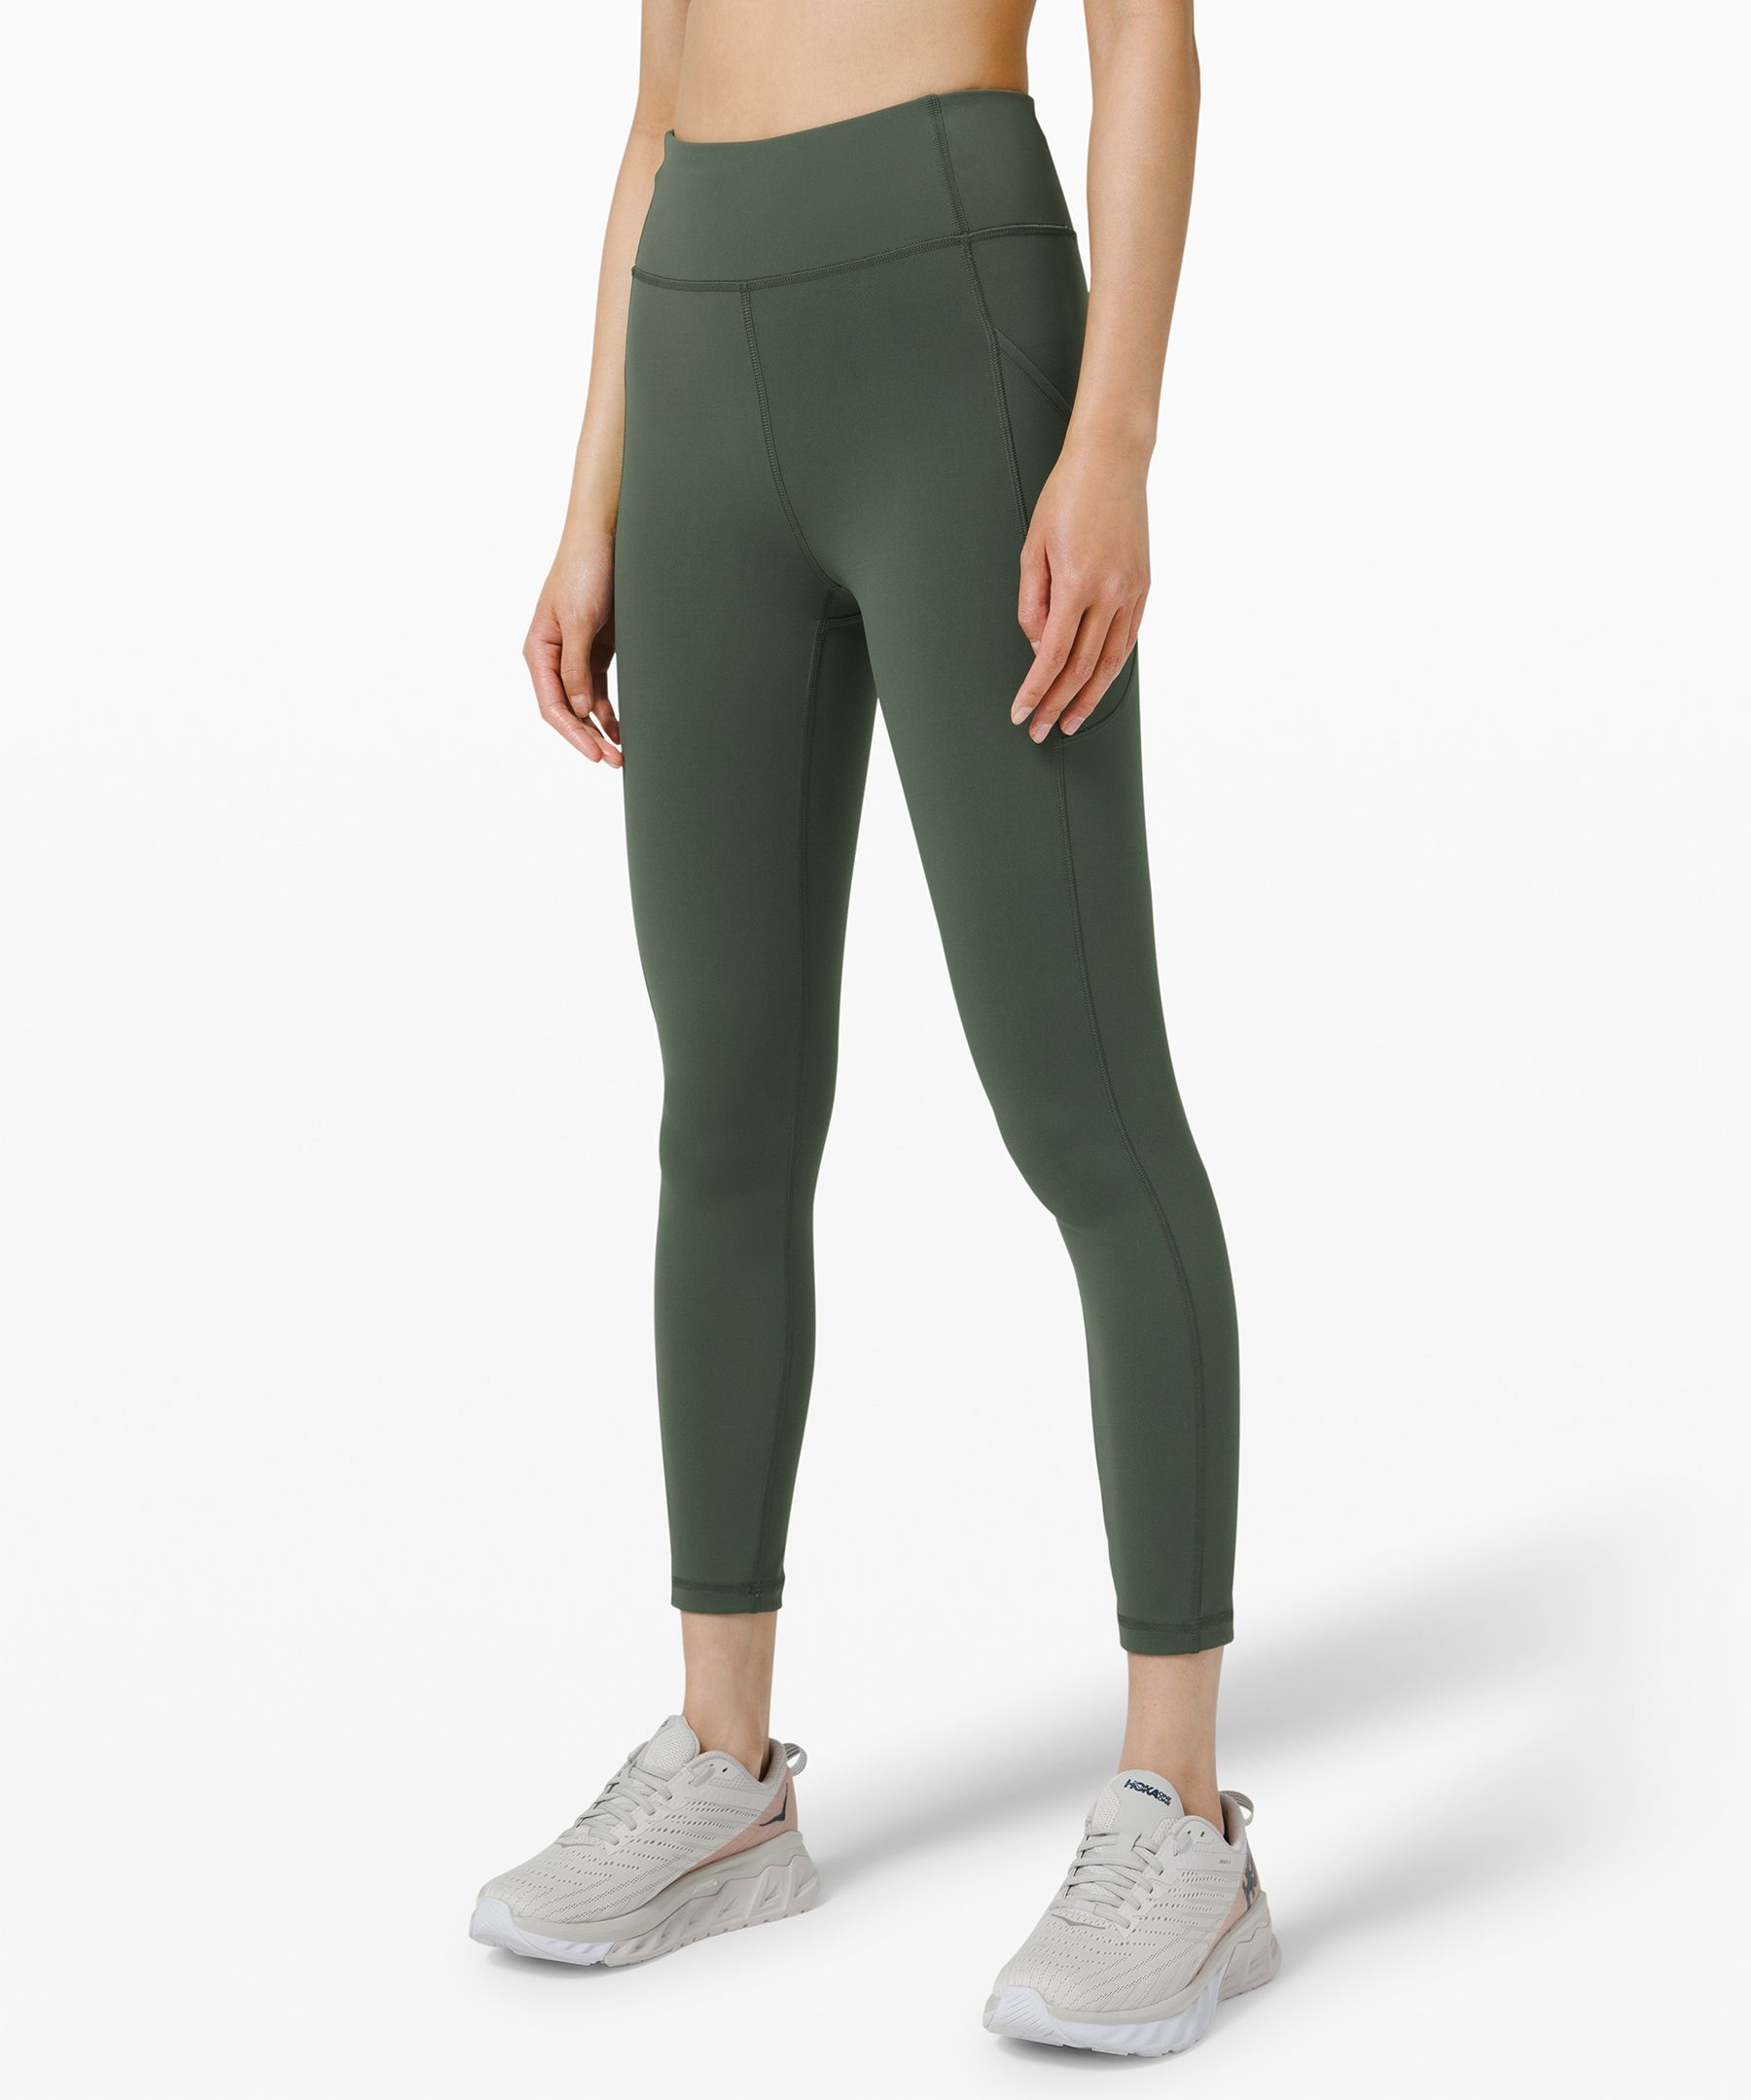 Lululemon Invigorate High-rise Tights 25 In Smoked Spruce